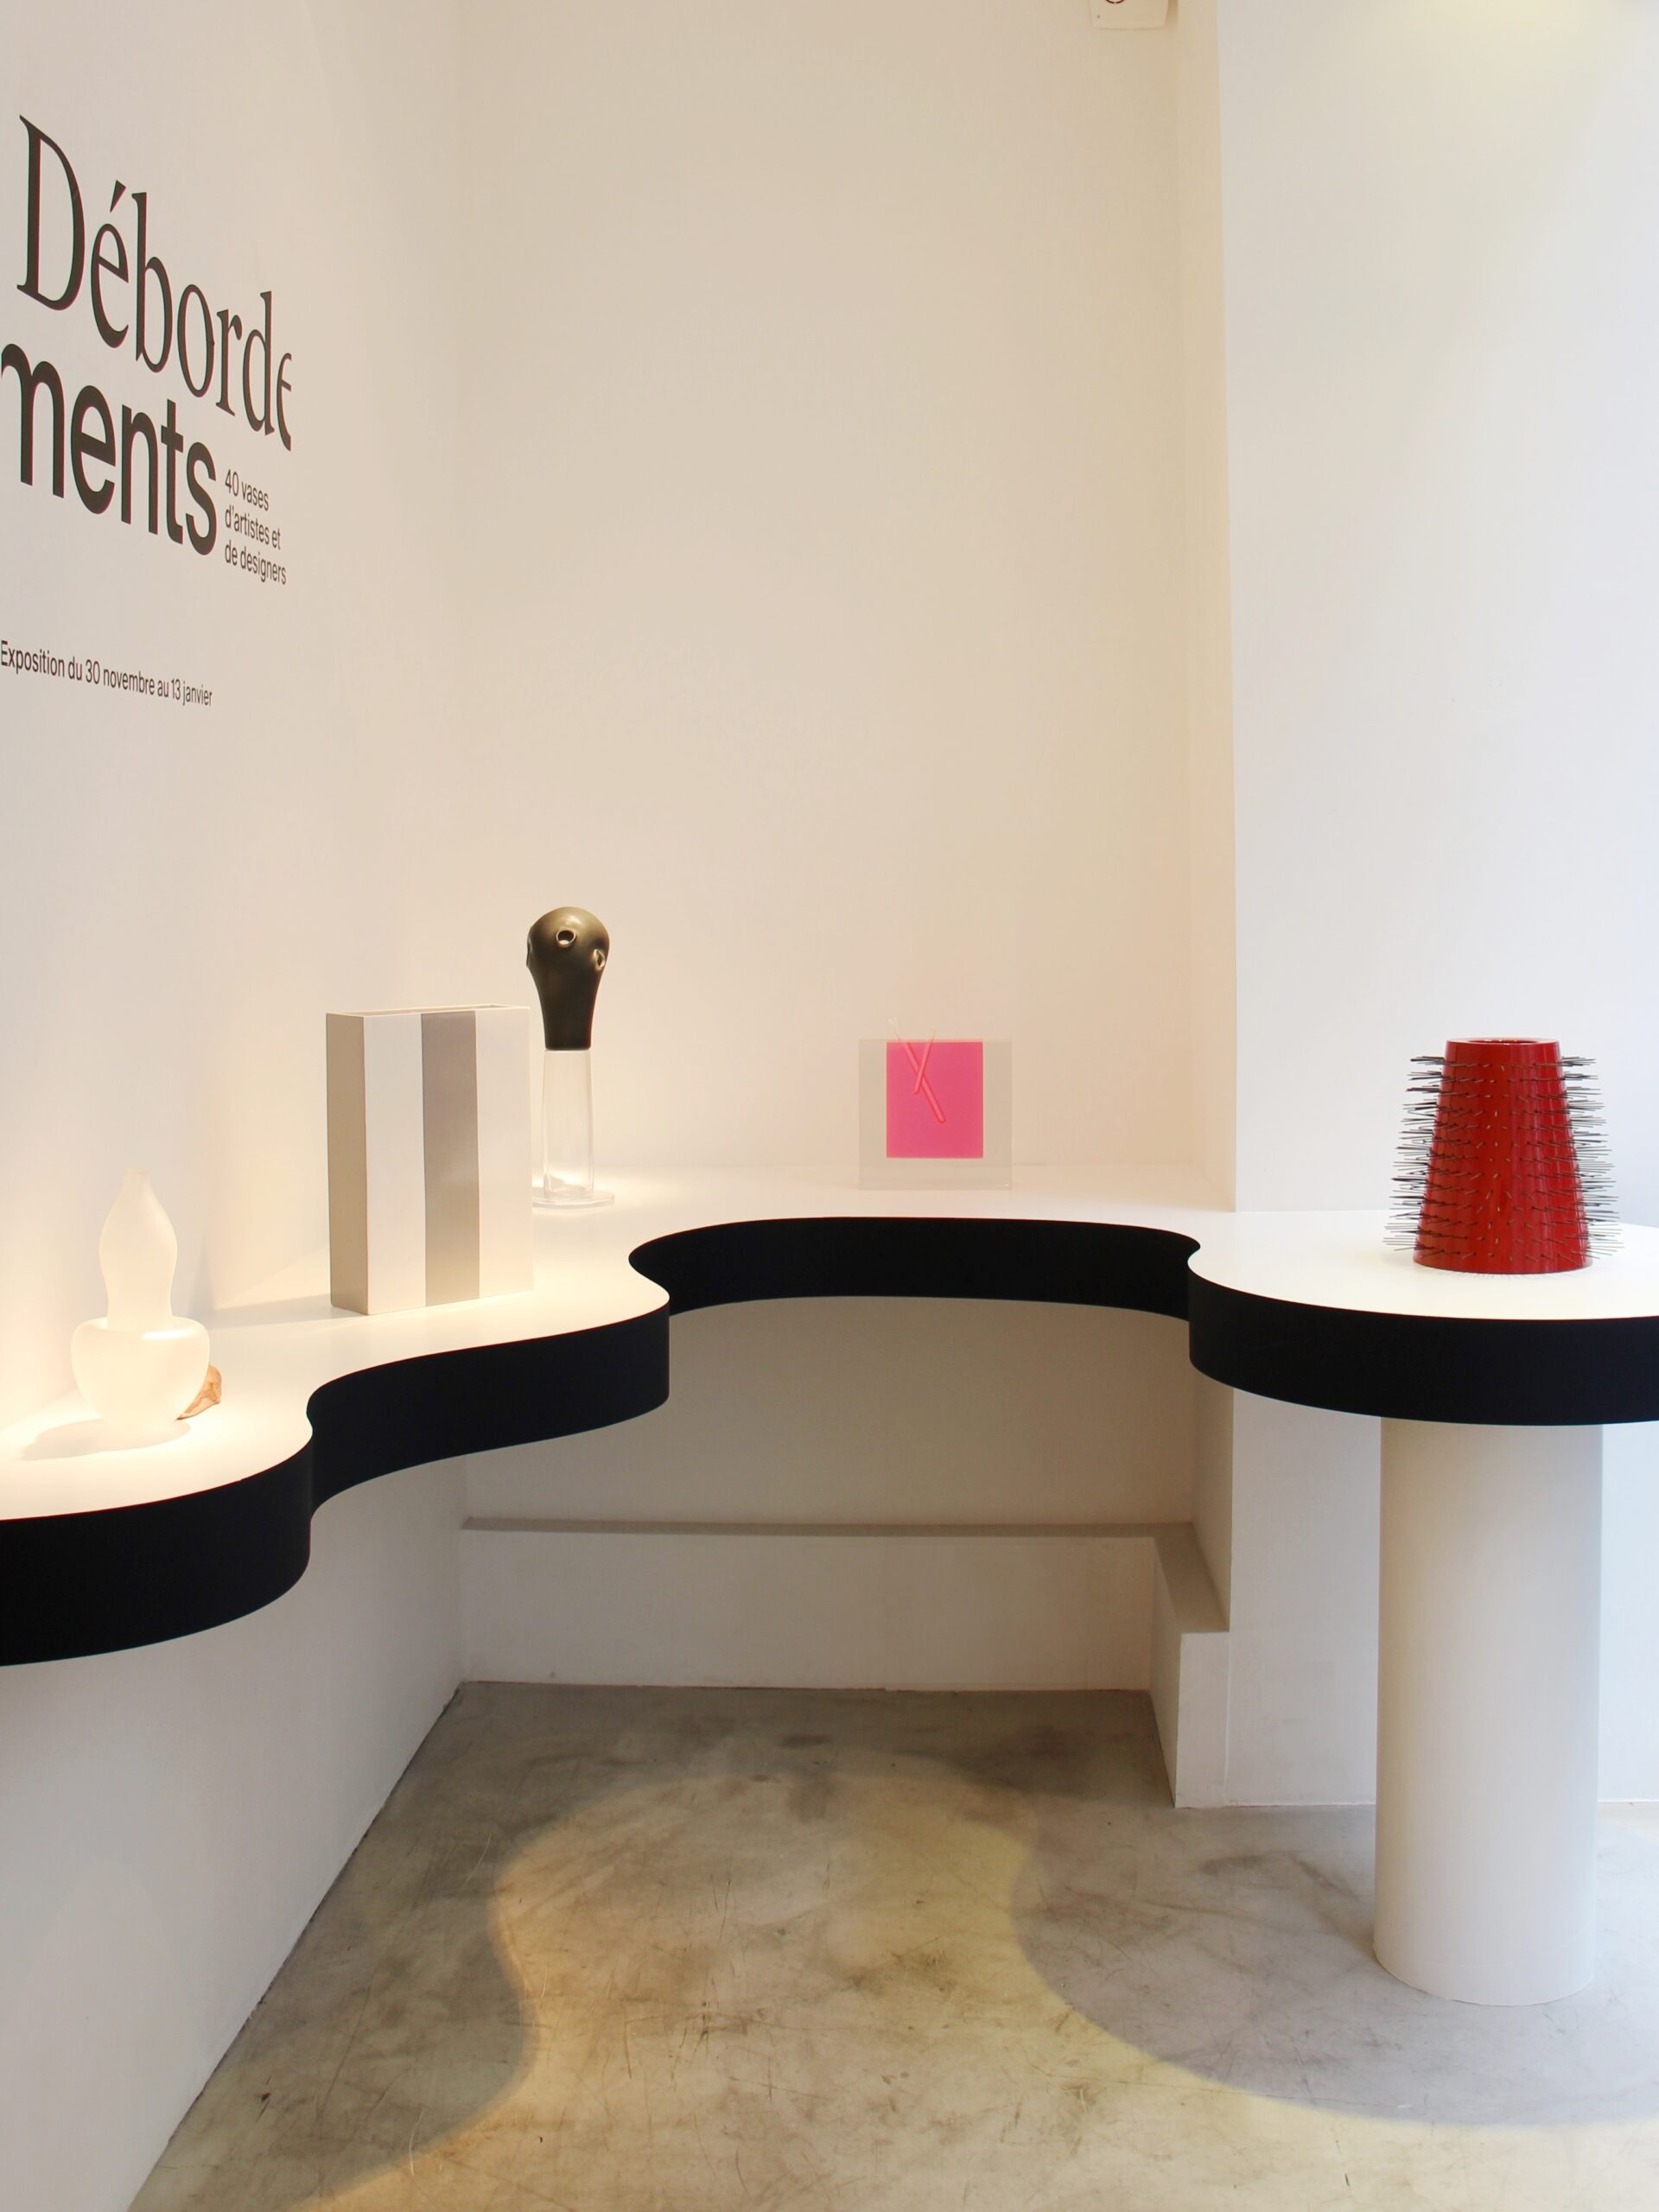 “Débordements: 40 vases by artists and designers”